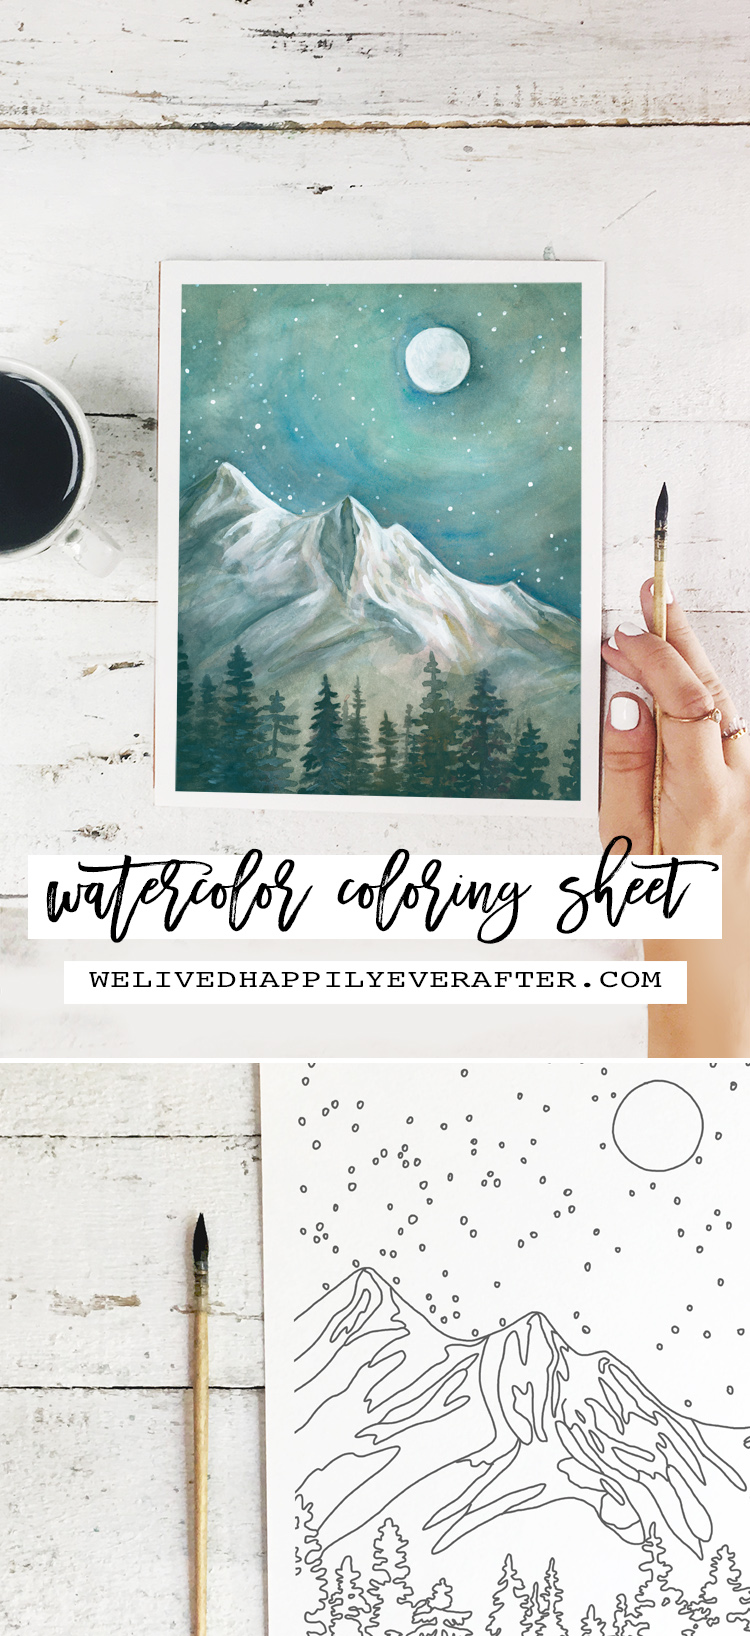 White Mountain Peaks Painting - Perfect For A DIY Girls Painting Party Night!